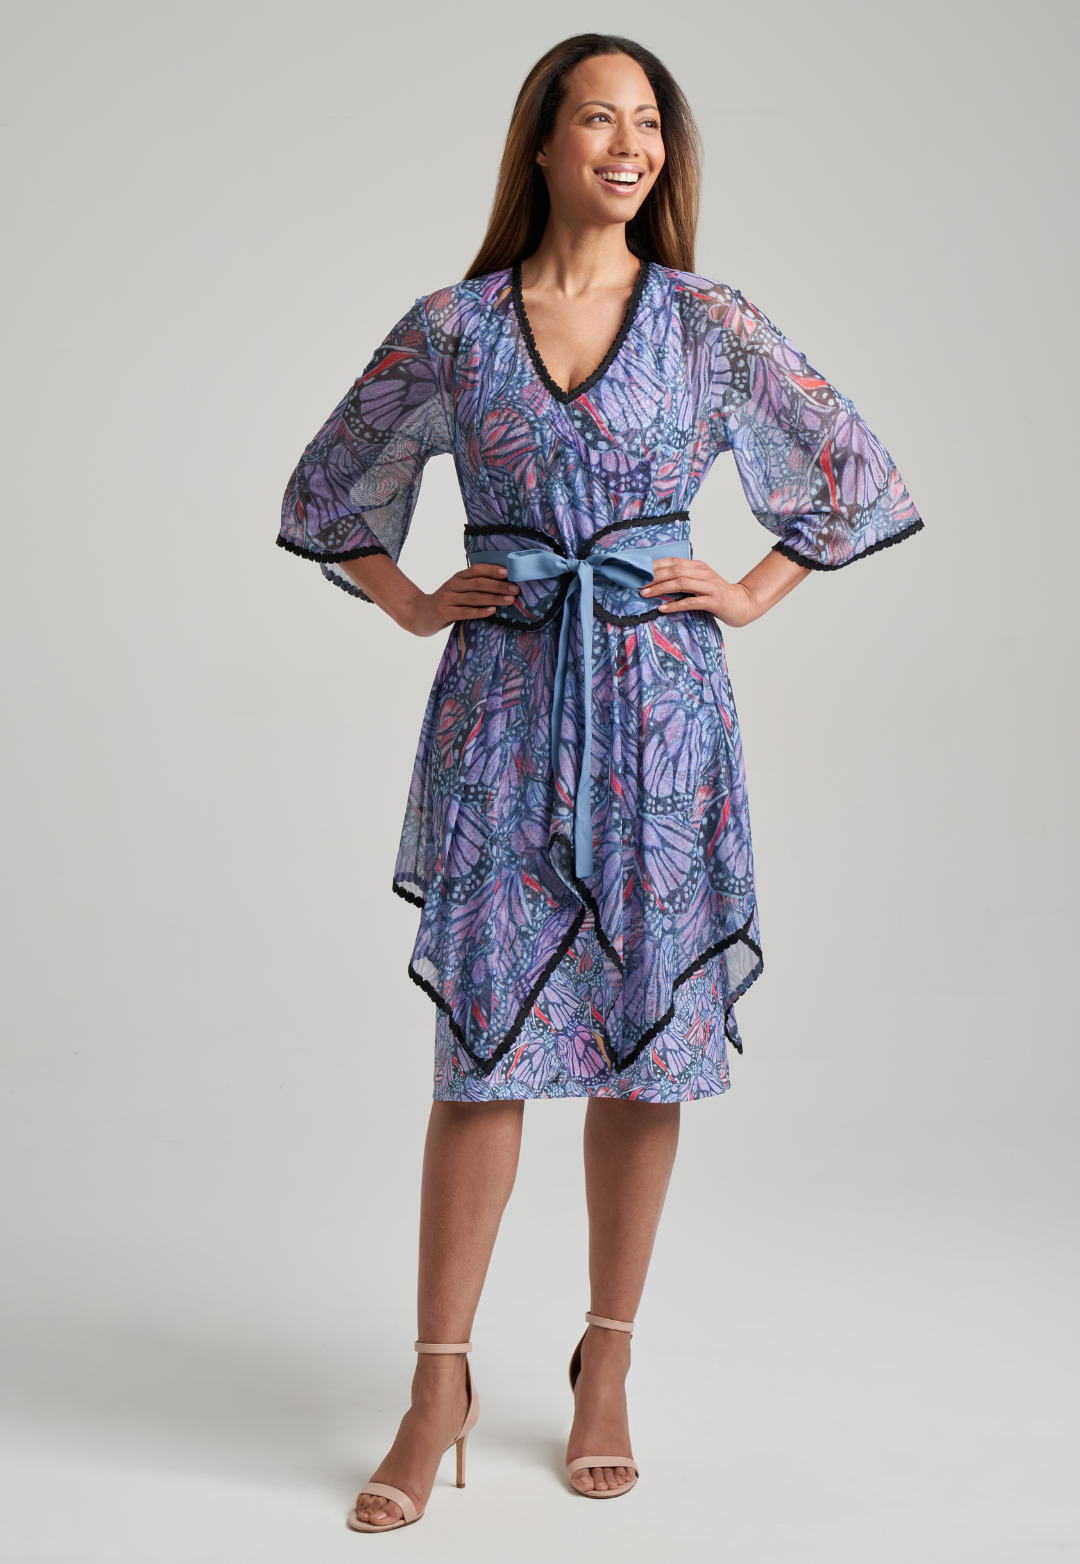 Woman wearing butterfly printed mesh poncho with black trim over printed stretch knit short dress by Ala von Auersperg for spring summer 2021